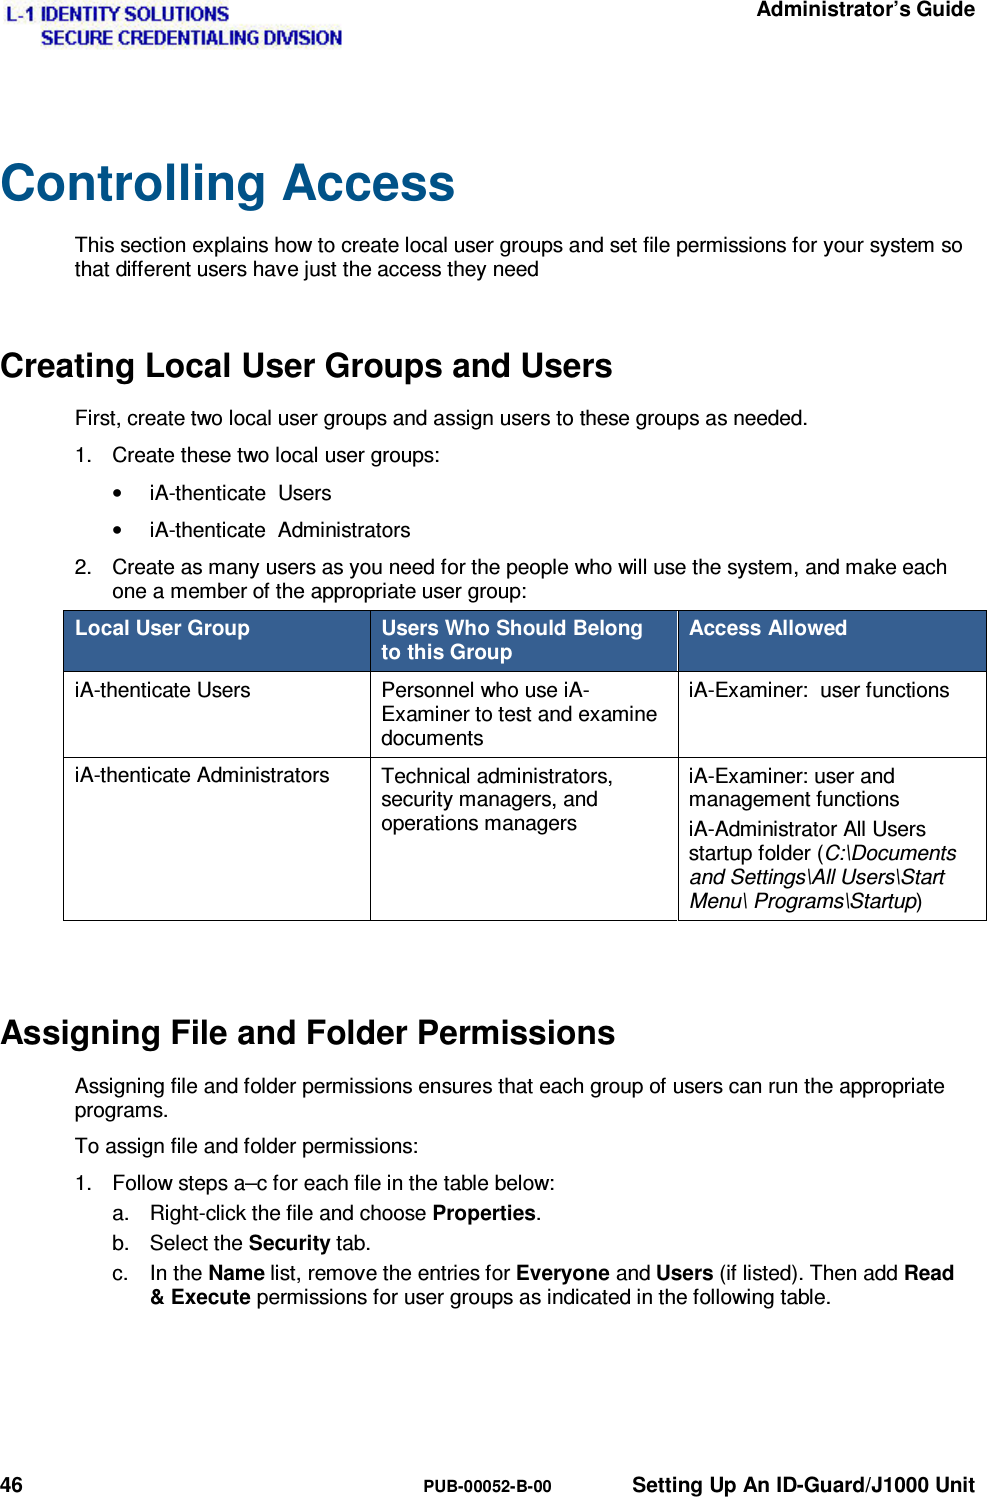   Administrator’s Guide 46  PUB-00052-B-00  Setting Up An ID-Guard/J1000 Unit Controlling Access This section explains how to create local user groups and set file permissions for your system so that different users have just the access they need Creating Local User Groups and Users First, create two local user groups and assign users to these groups as needed. 1.  Create these two local user groups: •  iA-thenticate  Users •  iA-thenticate  Administrators 2.  Create as many users as you need for the people who will use the system, and make each one a member of the appropriate user group: Local User Group  Users Who Should Belong to this Group Access Allowed iA-thenticate Users  Personnel who use iA-Examiner to test and examine documents iA-Examiner:  user functions iA-thenticate Administrators  Technical administrators, security managers, and operations managers iA-Examiner: user and management functions iA-Administrator All Users startup folder (C:\Documents and Settings\All Users\Start Menu\ Programs\Startup)  Assigning File and Folder Permissions Assigning file and folder permissions ensures that each group of users can run the appropriate programs. To assign file and folder permissions: 1.  Follow steps a–c for each file in the table below: a.  Right-click the file and choose Properties. b. Select the Security tab. c. In the Name list, remove the entries for Everyone and Users (if listed). Then add Read &amp; Execute permissions for user groups as indicated in the following table.   